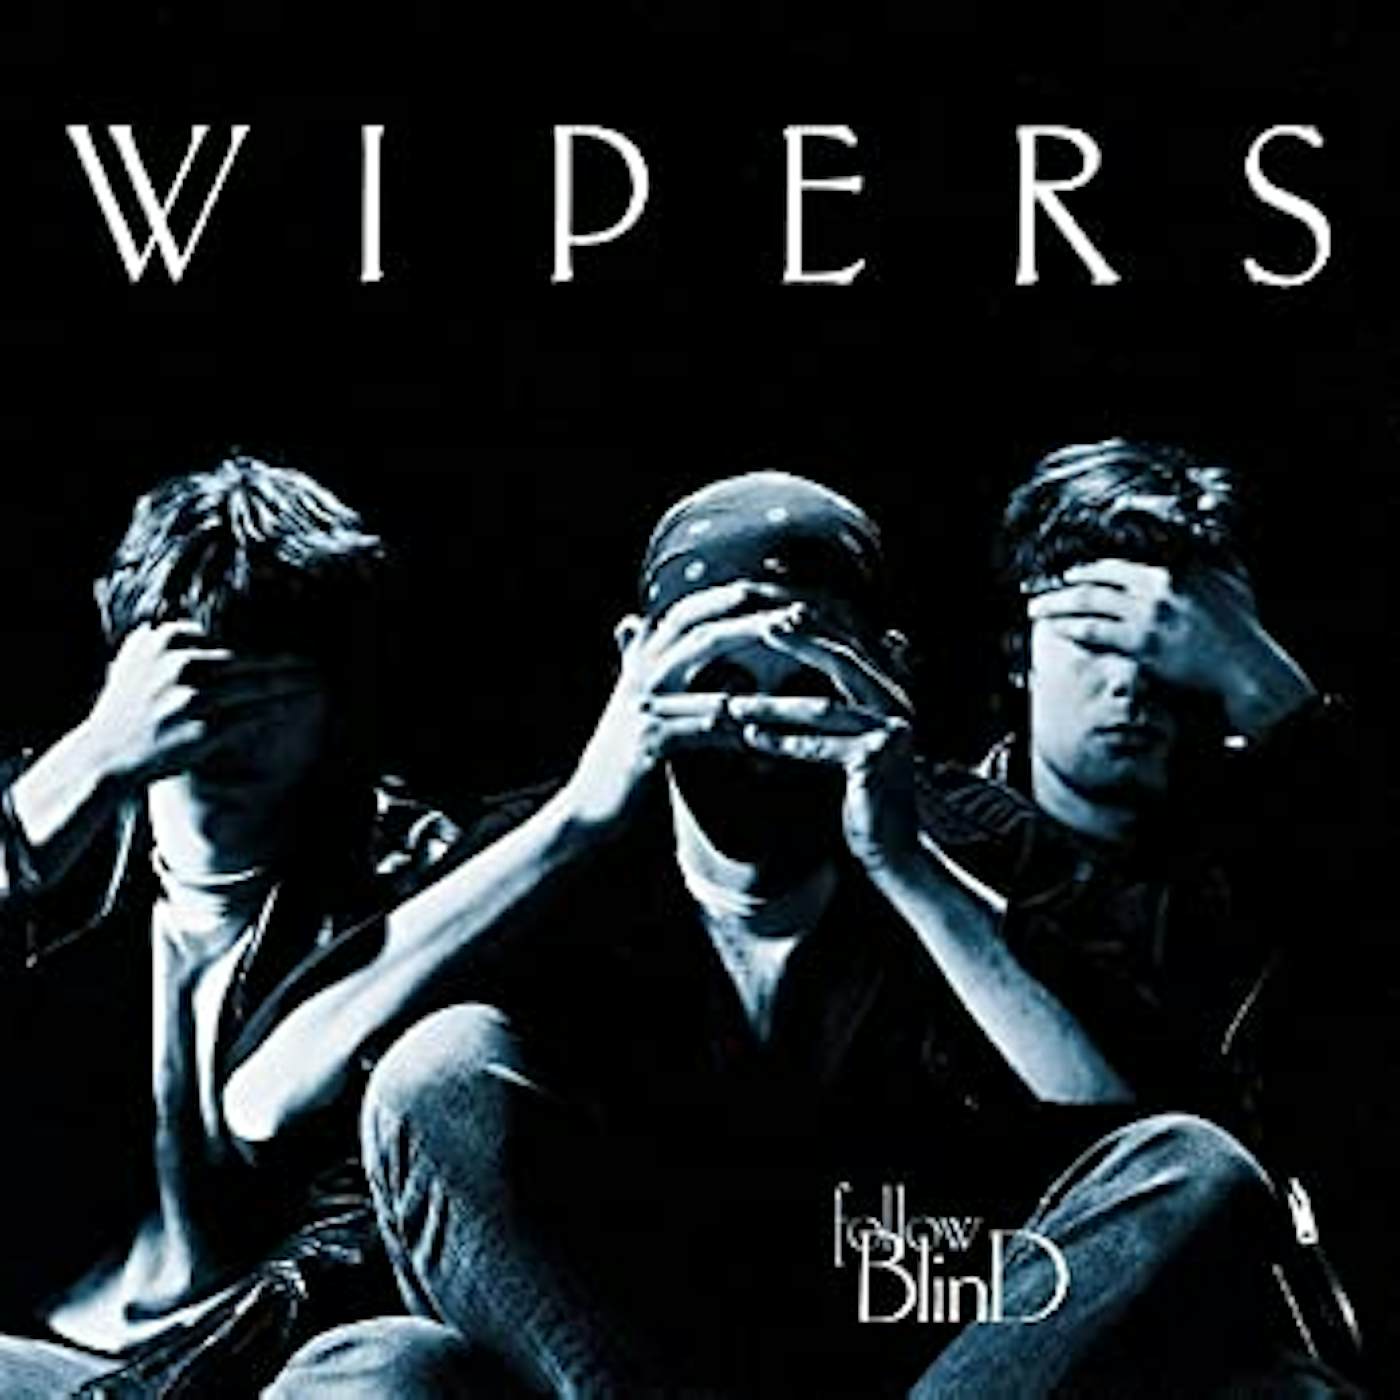 Wipers Follow Blind Vinyl Record